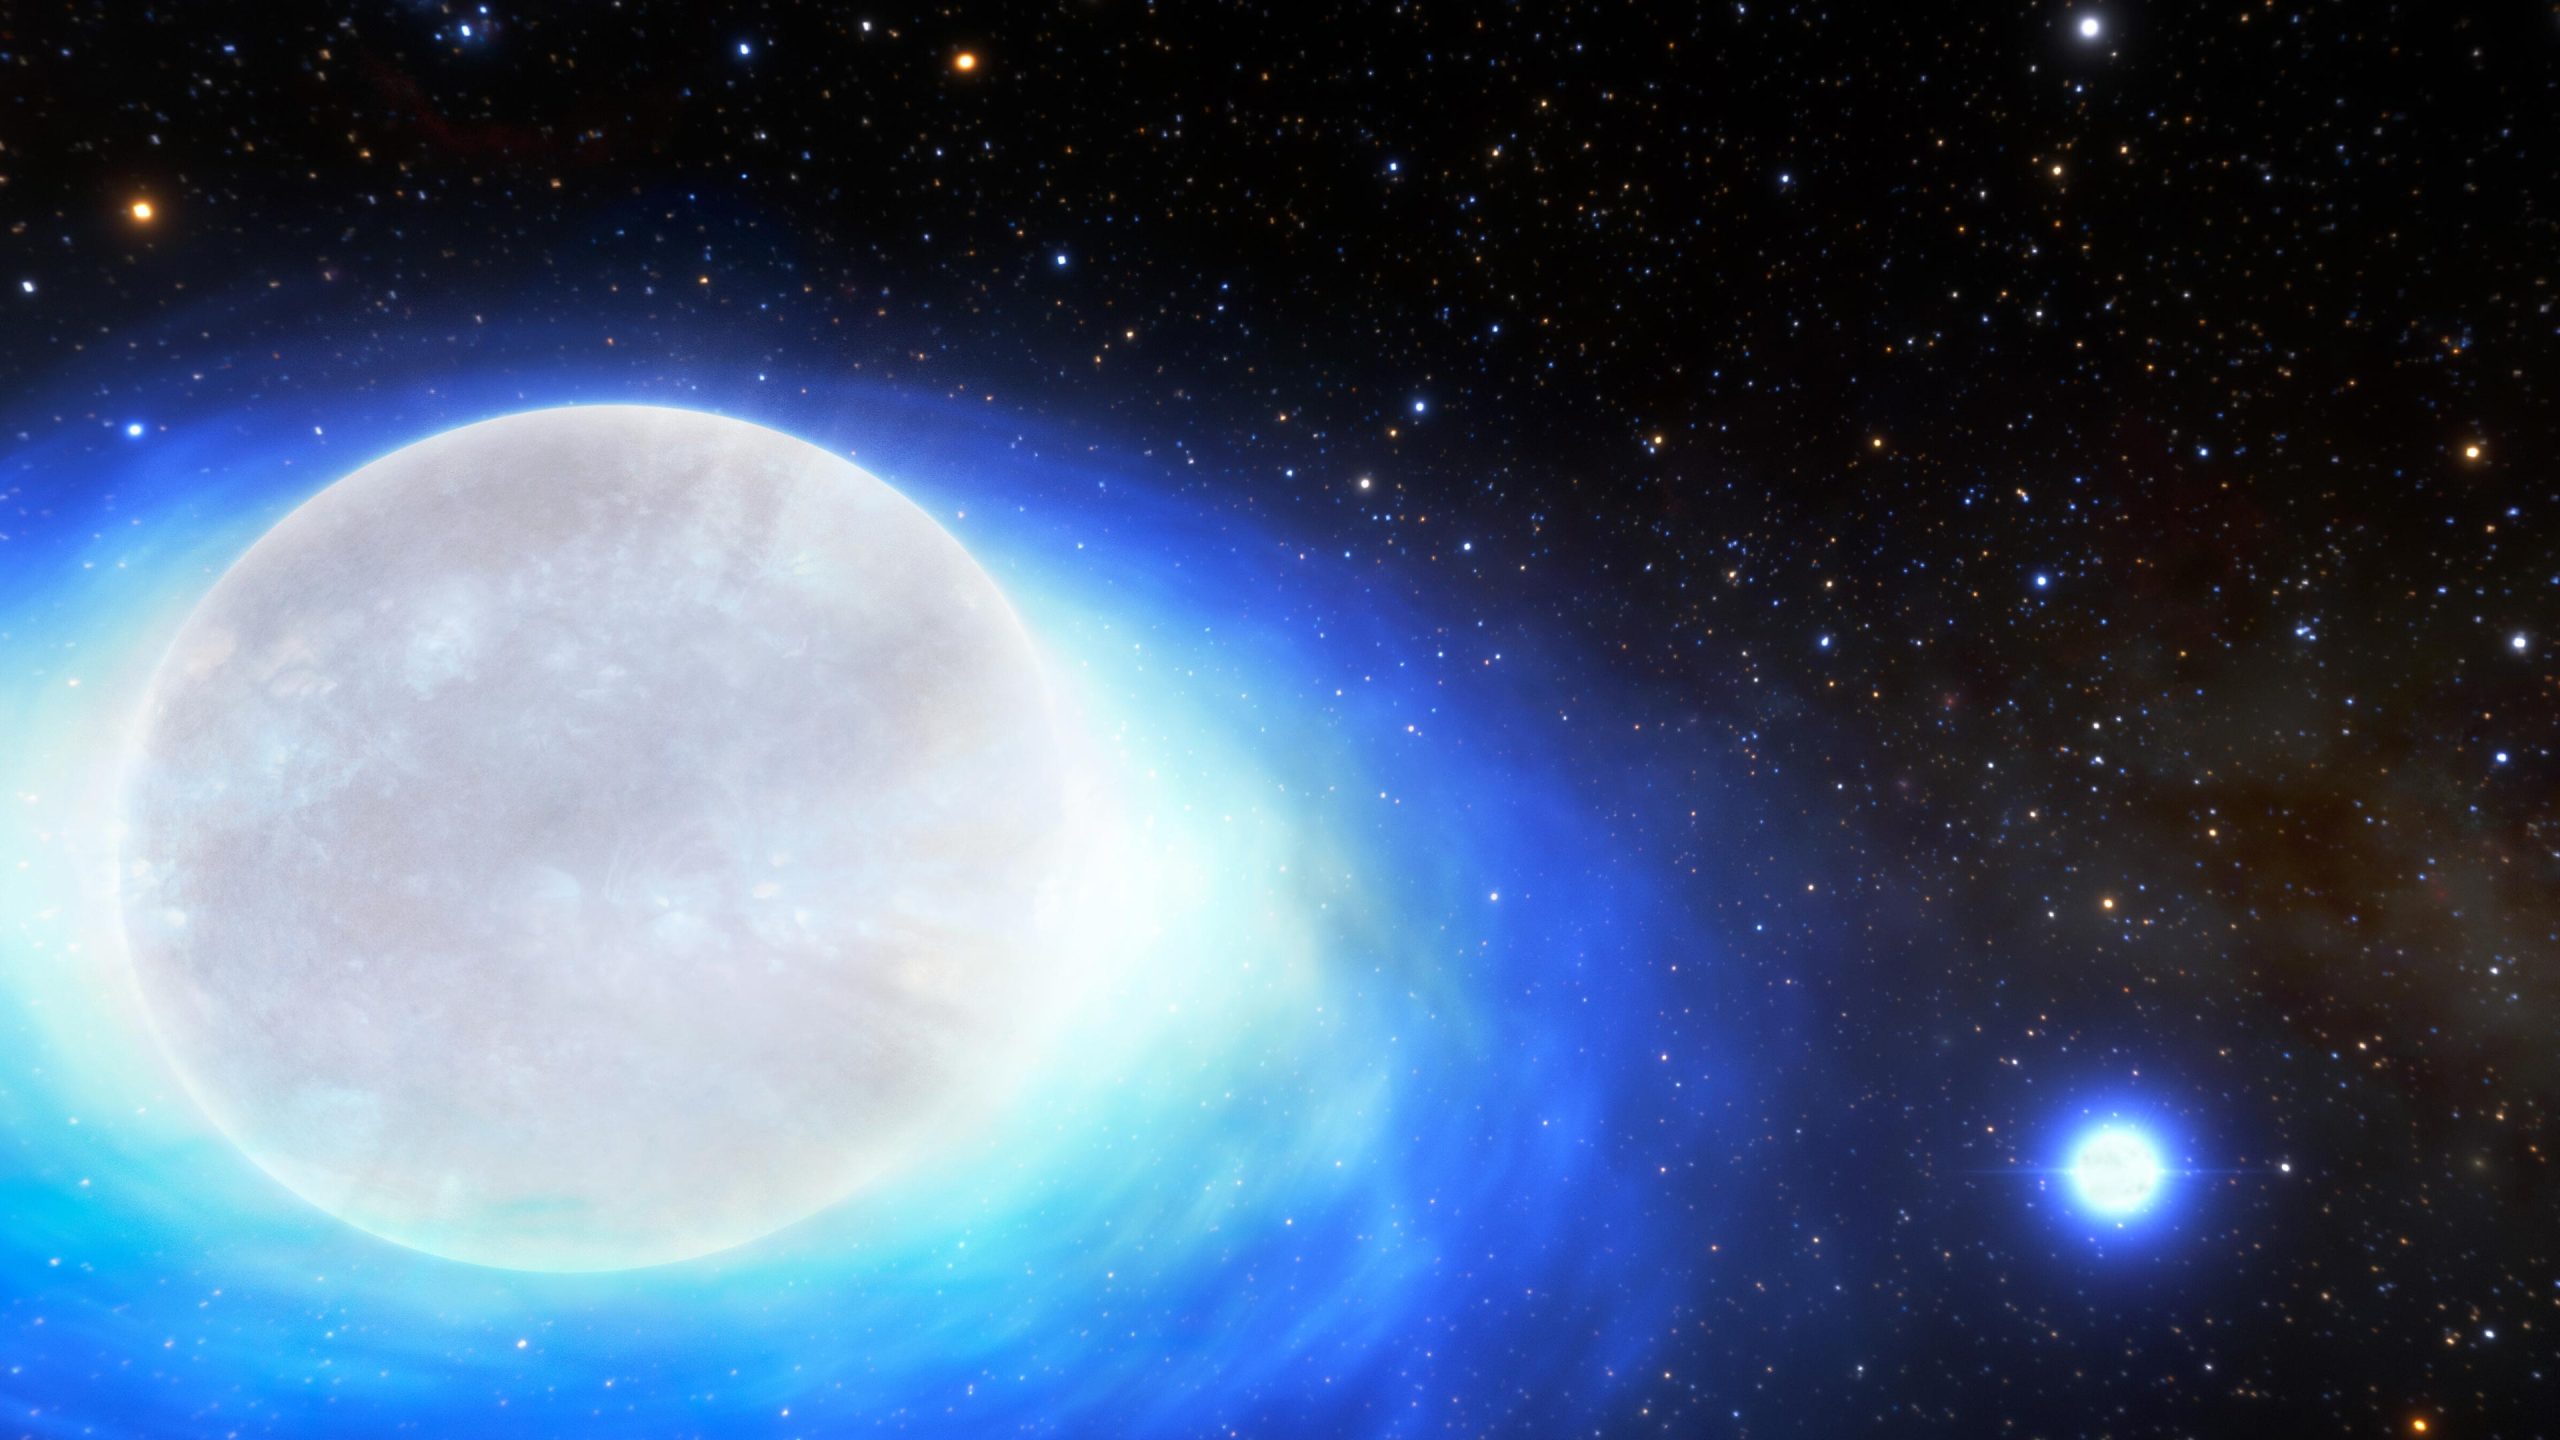 Supernova Fizzles Out: Rare Twin Star System Discovered With a Weirdly Circular Orbit - SciTechDaily : After crunching a mountain of astronomy data, Clarissa Pavao, an undergraduate at Embry-Riddle Aeronautical University’s Prescott, Arizona campus, submitted her preliminary analysis. Her mentor’s response was swift and in all-caps. “THERE’S AN ORBIT!” he wrot…  | Tranquility 國際社群